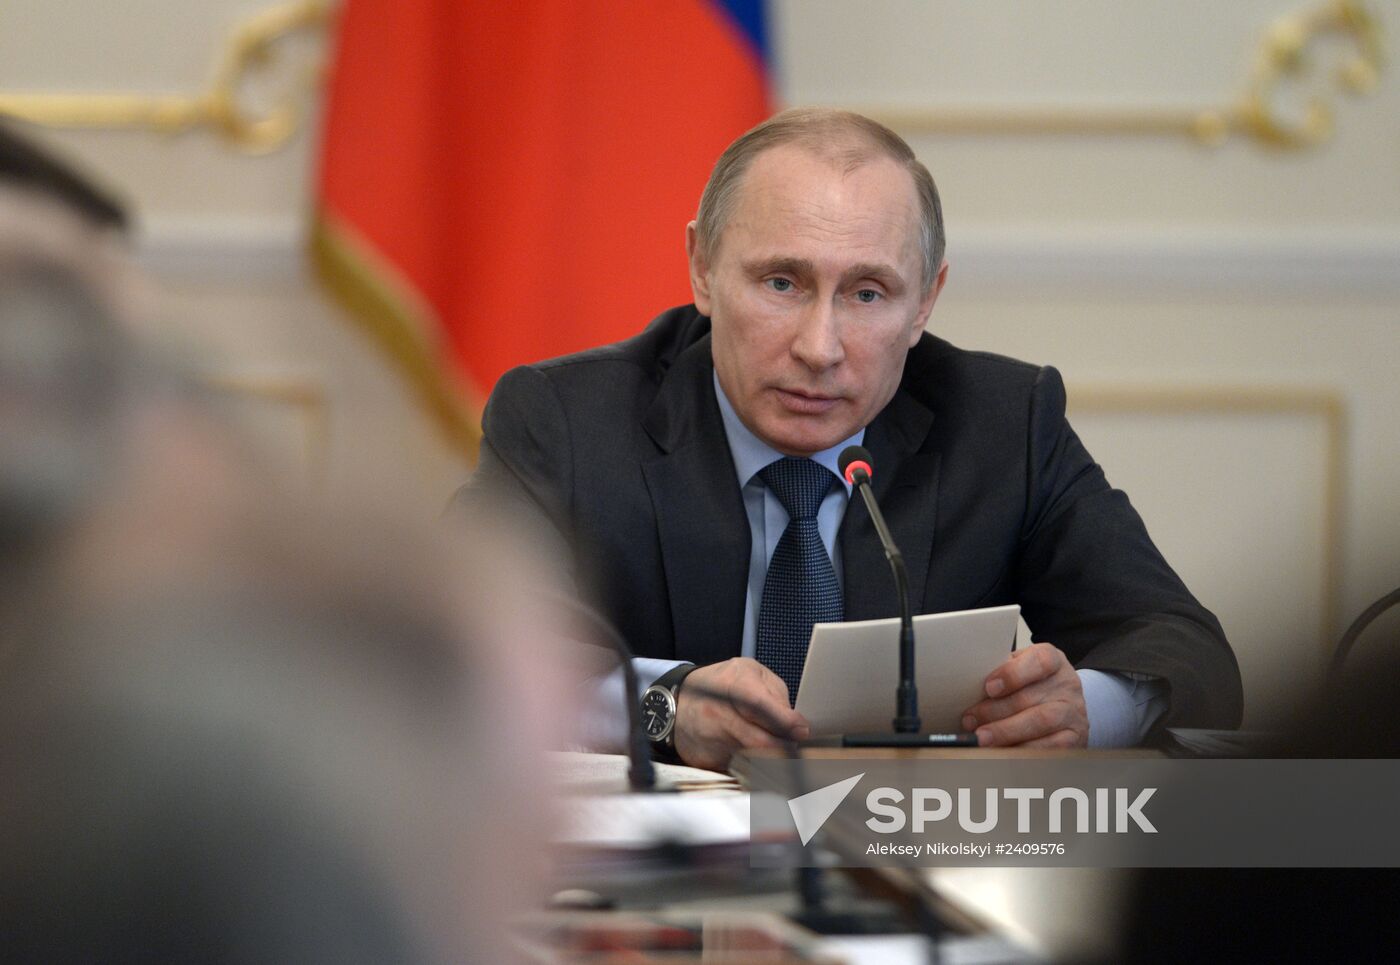 Vladimir Putin conducts meeting of Strategic Initiative Agency's Supervisory Council